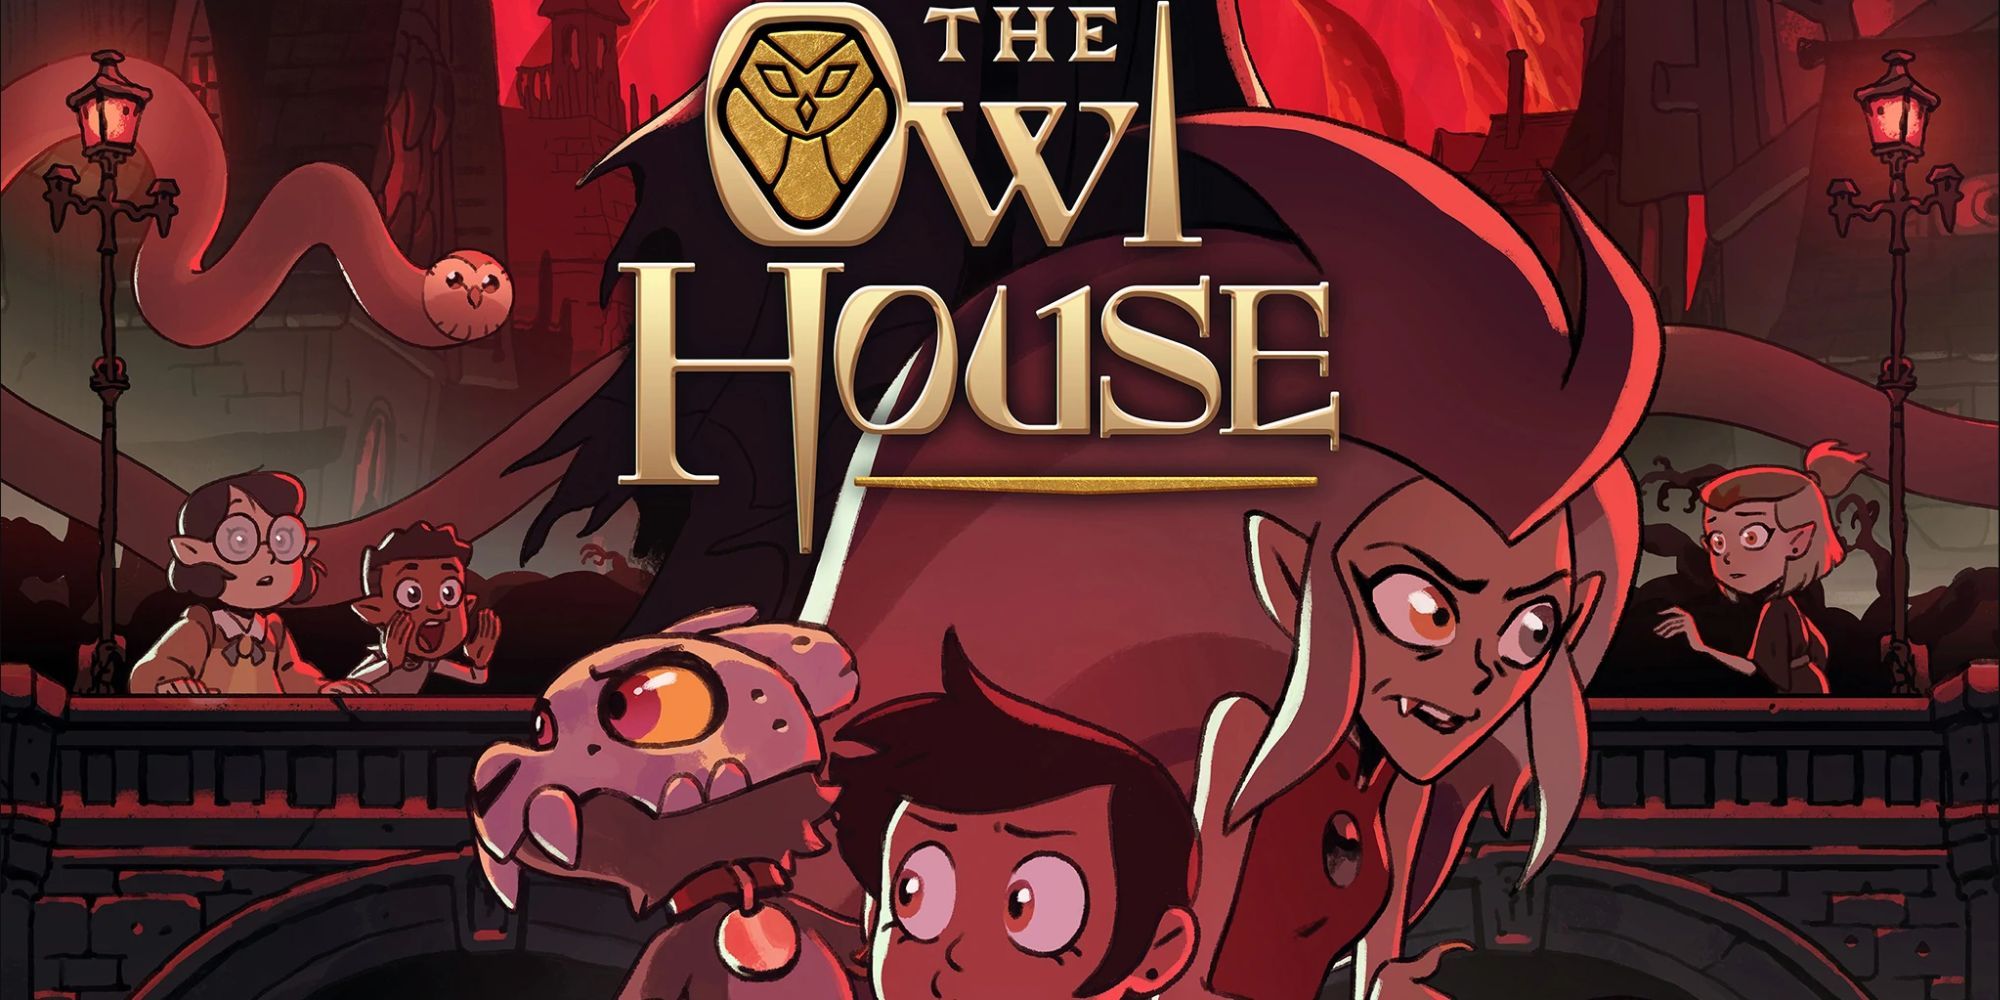 The Owl House Season 2: Premiere, Story, Trailer & News to Know